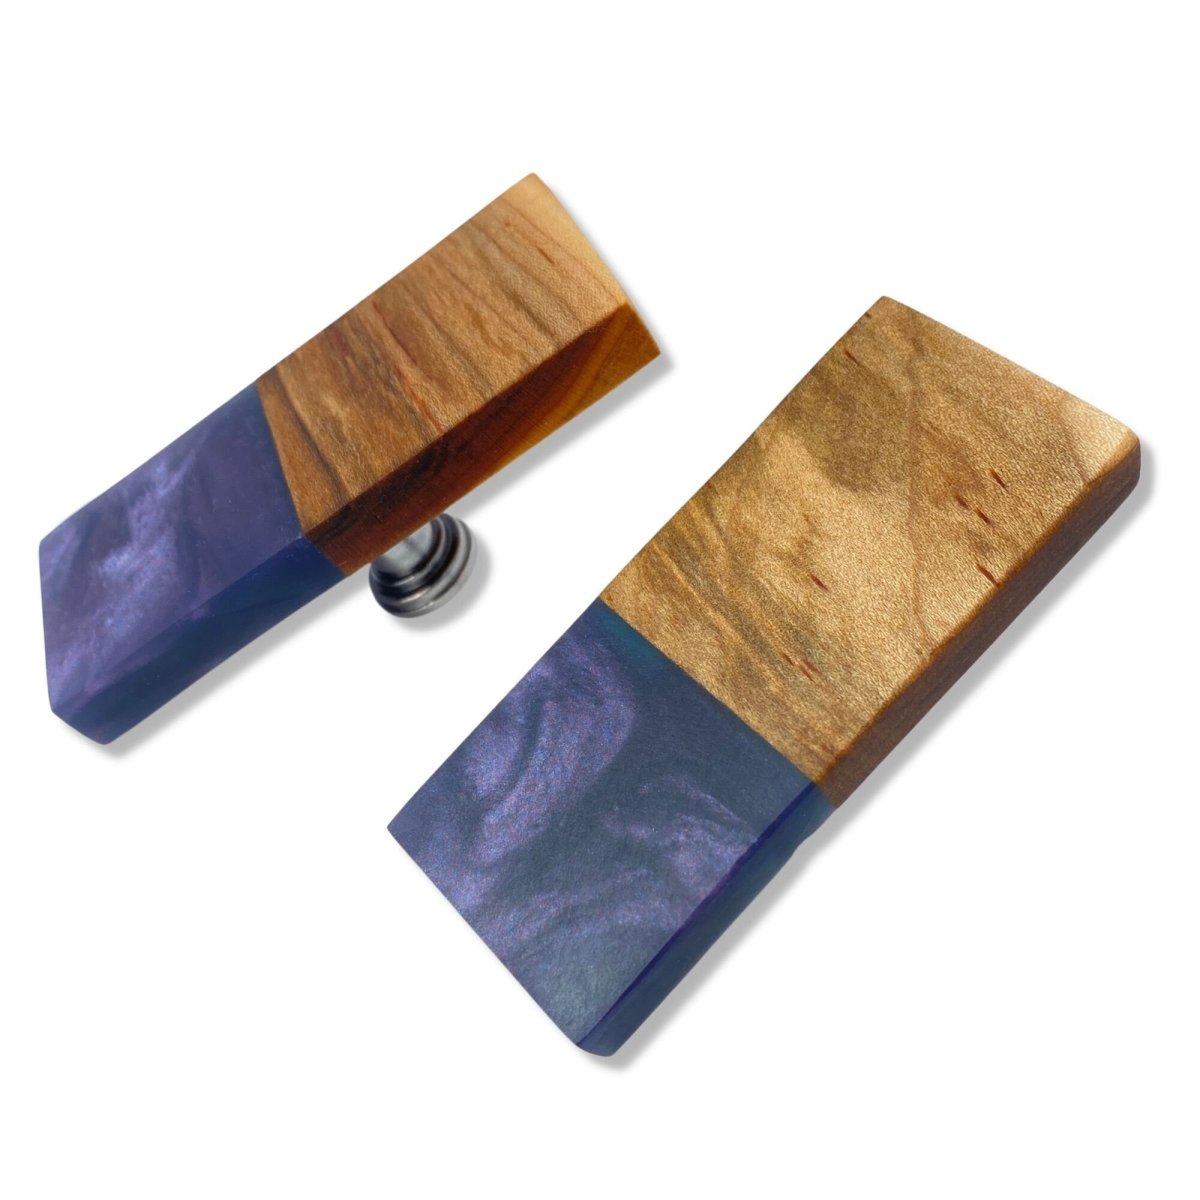 Large Drawer Knob Made of Maple and Deep Purple Resin SET of 2 - DaRosa Creations